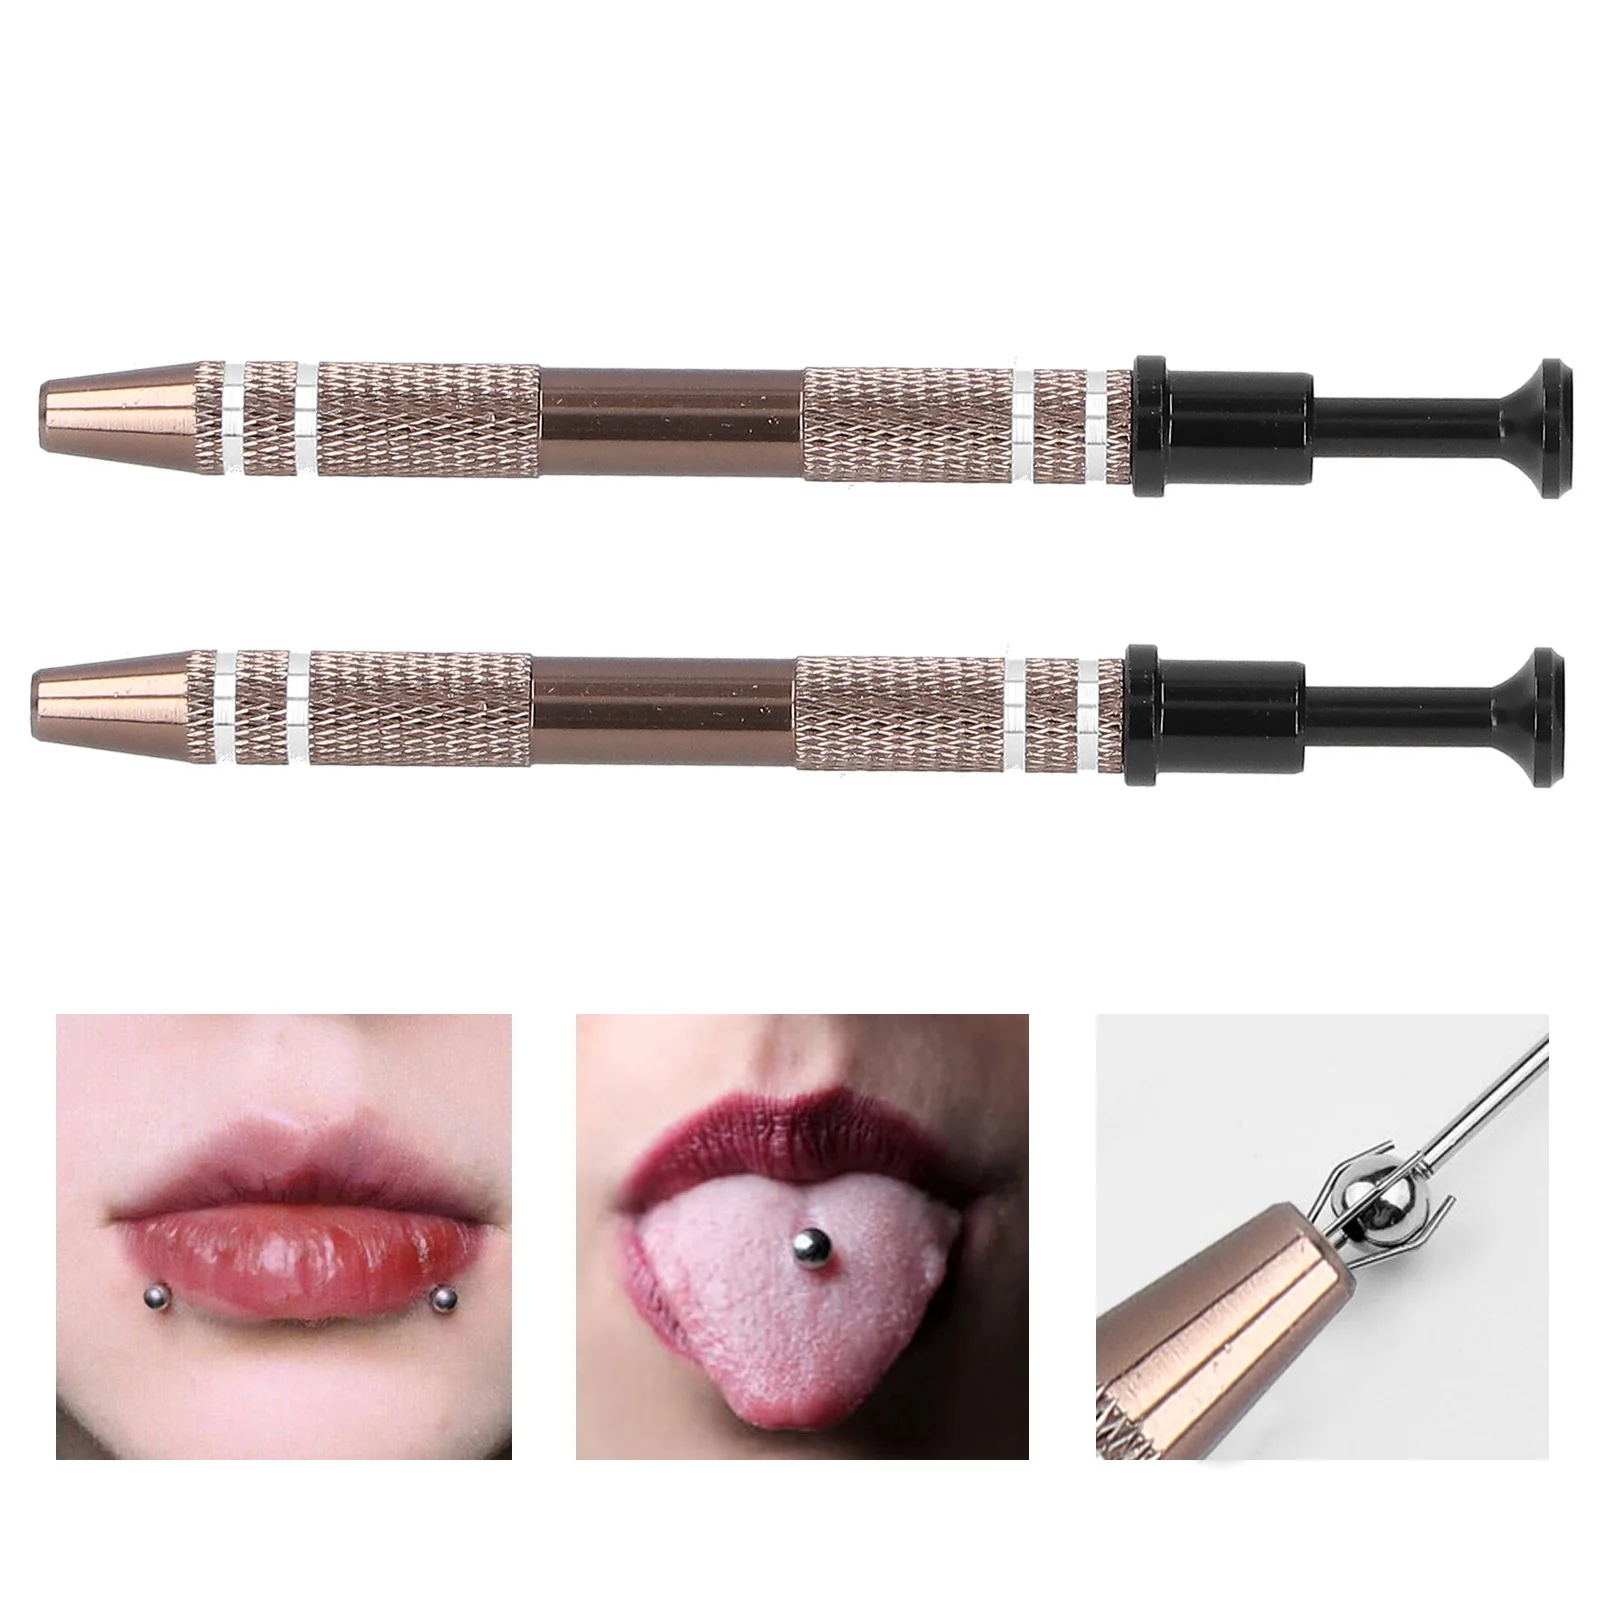 2Pcs Microblading Alloy High Precision 4 Prongs Bead Holder Jewelry Bead Grasping Pick Up Tool Body Tattoo Piercing Accessories 4 claws beads holder pick up tool diamond gems prong holder tweezer catcher grabber high precision body tattoo piercing tool 1pc